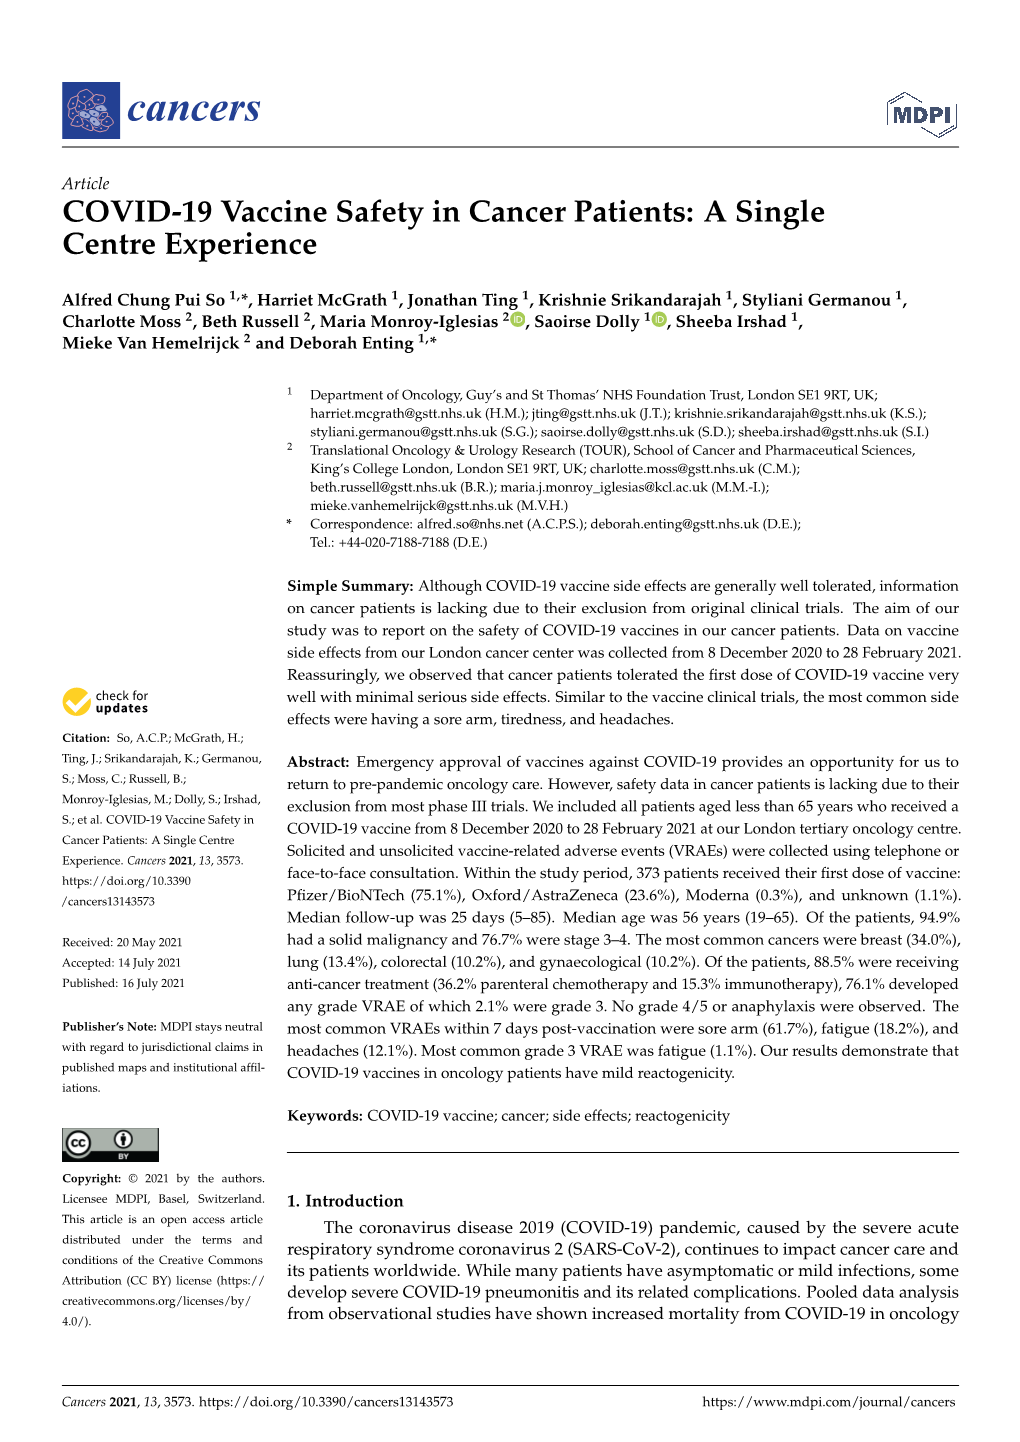 COVID-19 Vaccine Safety in Cancer Patients: a Single Centre Experience